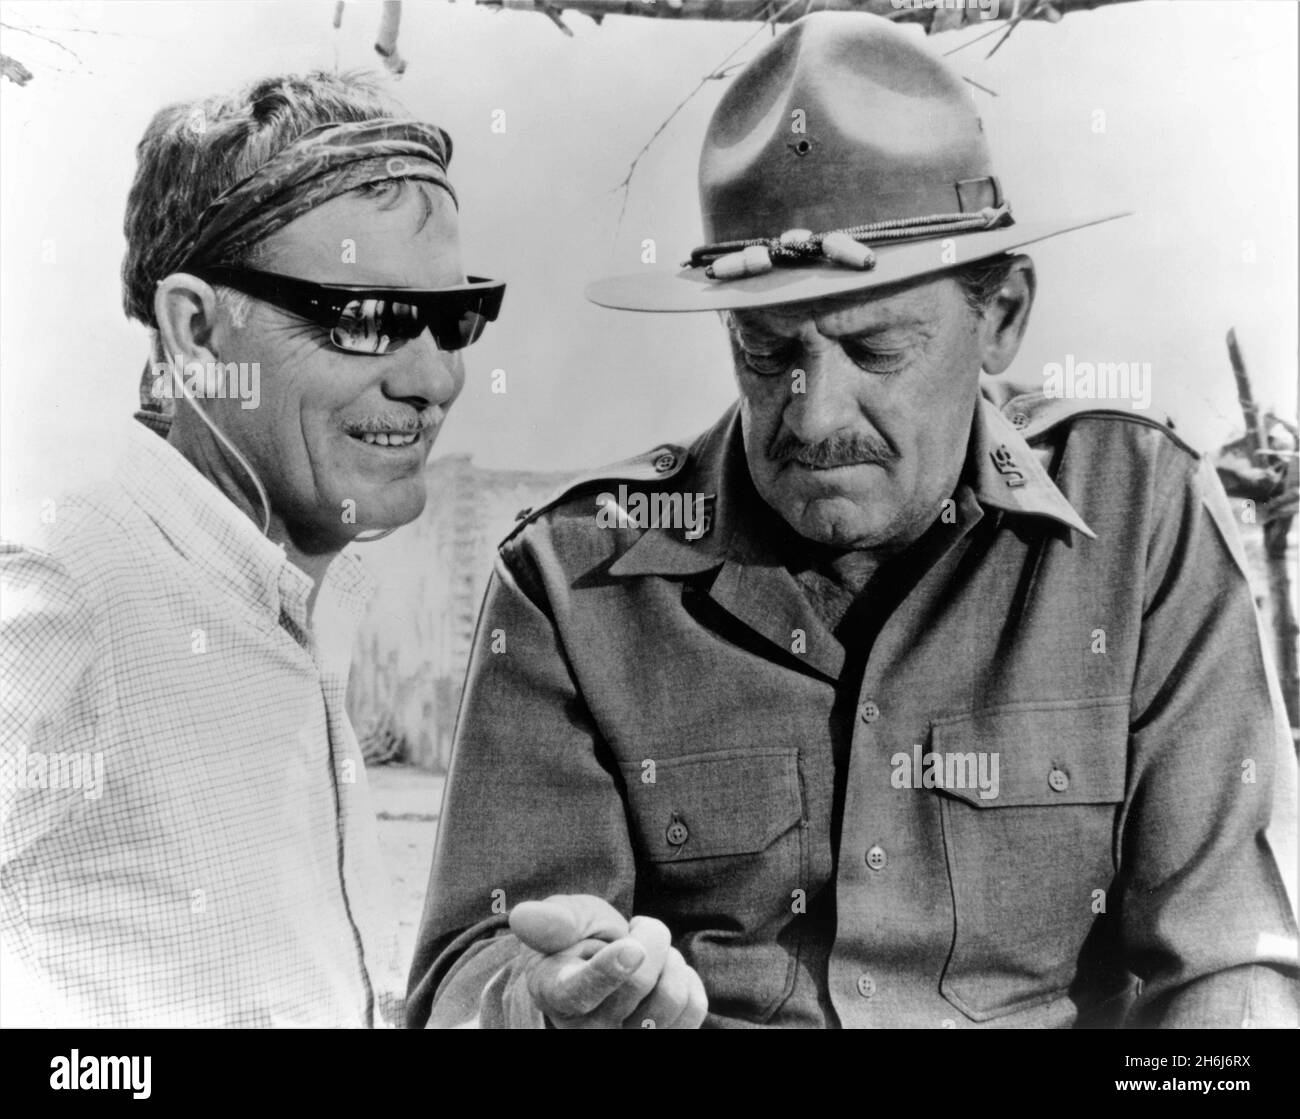 Director SAM PECKINPAH and WILLIAM HOLDEN on set location candid during filming of THE WILD BUNCH 1969 director SAM PECKINPAH story Walon Green and Roy N. Sickner screenplay Walon Green and Sam Peckinpah music Jerry Fielding producer Phil Feldman Warner Bros. / Seven Arts Stock Photo